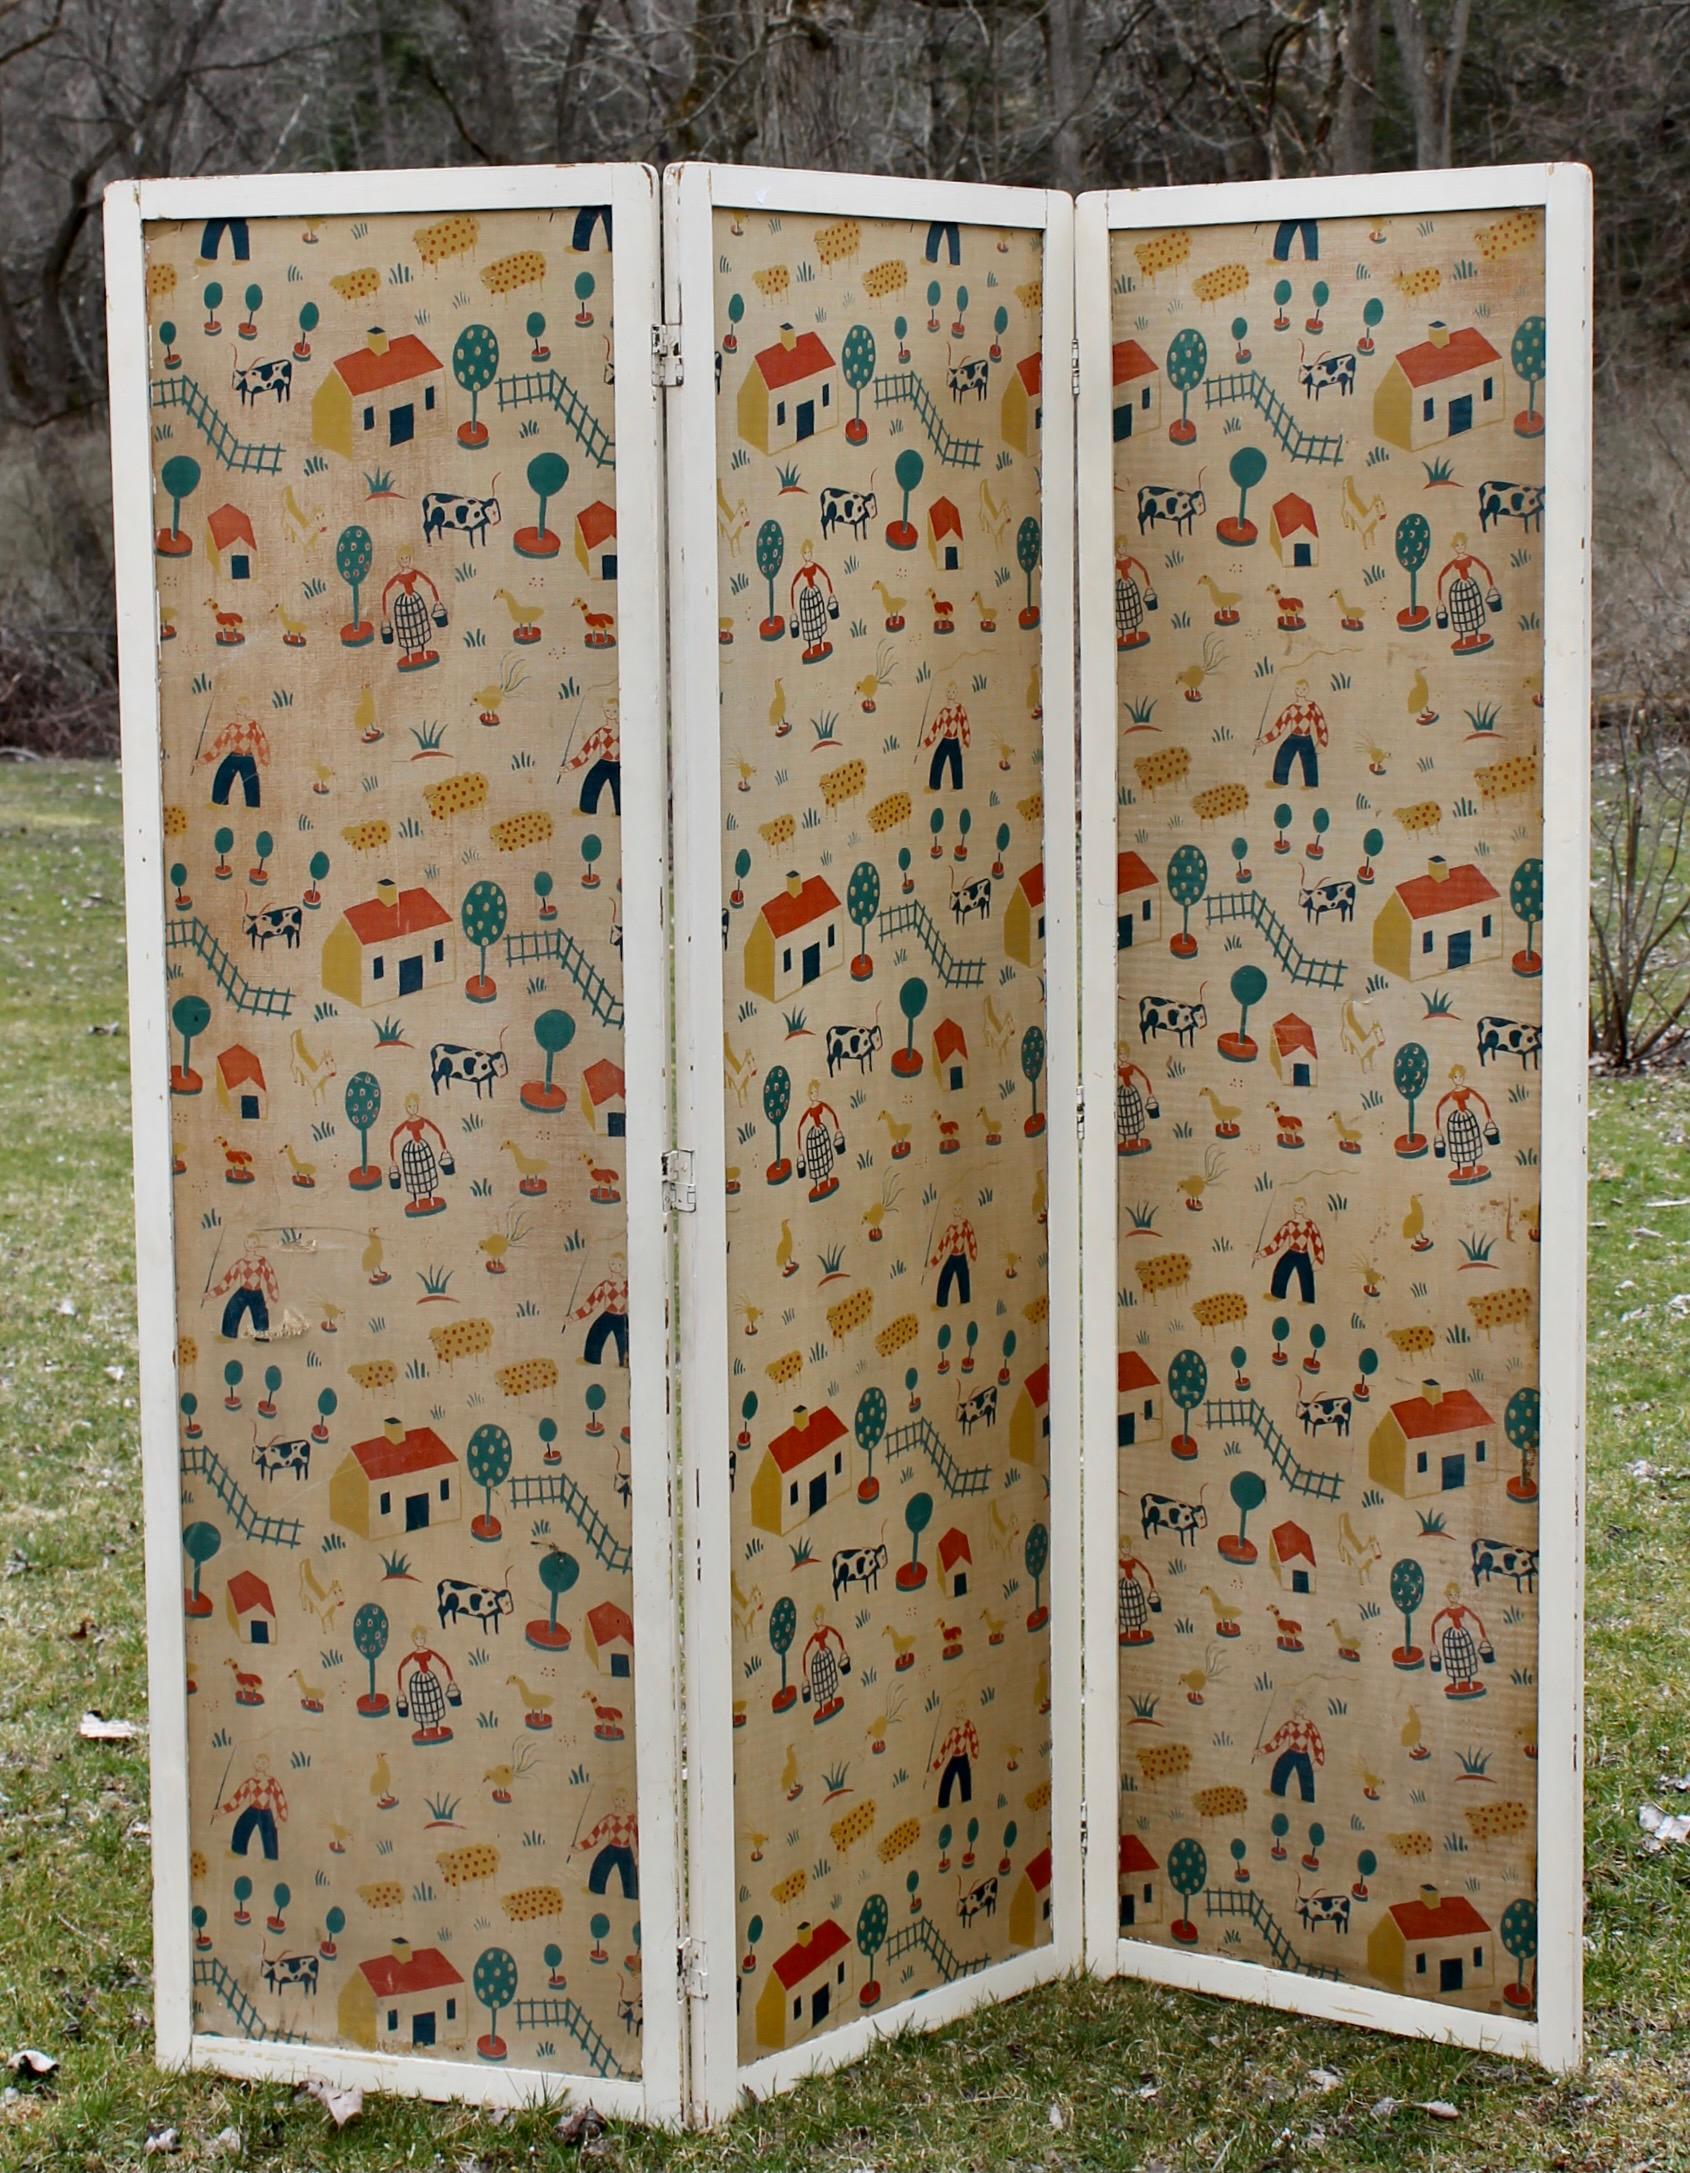 A three paneled wallpaper screen with stylized farm elements pattern.  Both sides-6 wallpaper sides in all.  Enough stylistic evidence to attribute the wallpaper to Ilonka Karasz.  A thorough going through of the Cooper Hewitt Ilonka Karasz Archives